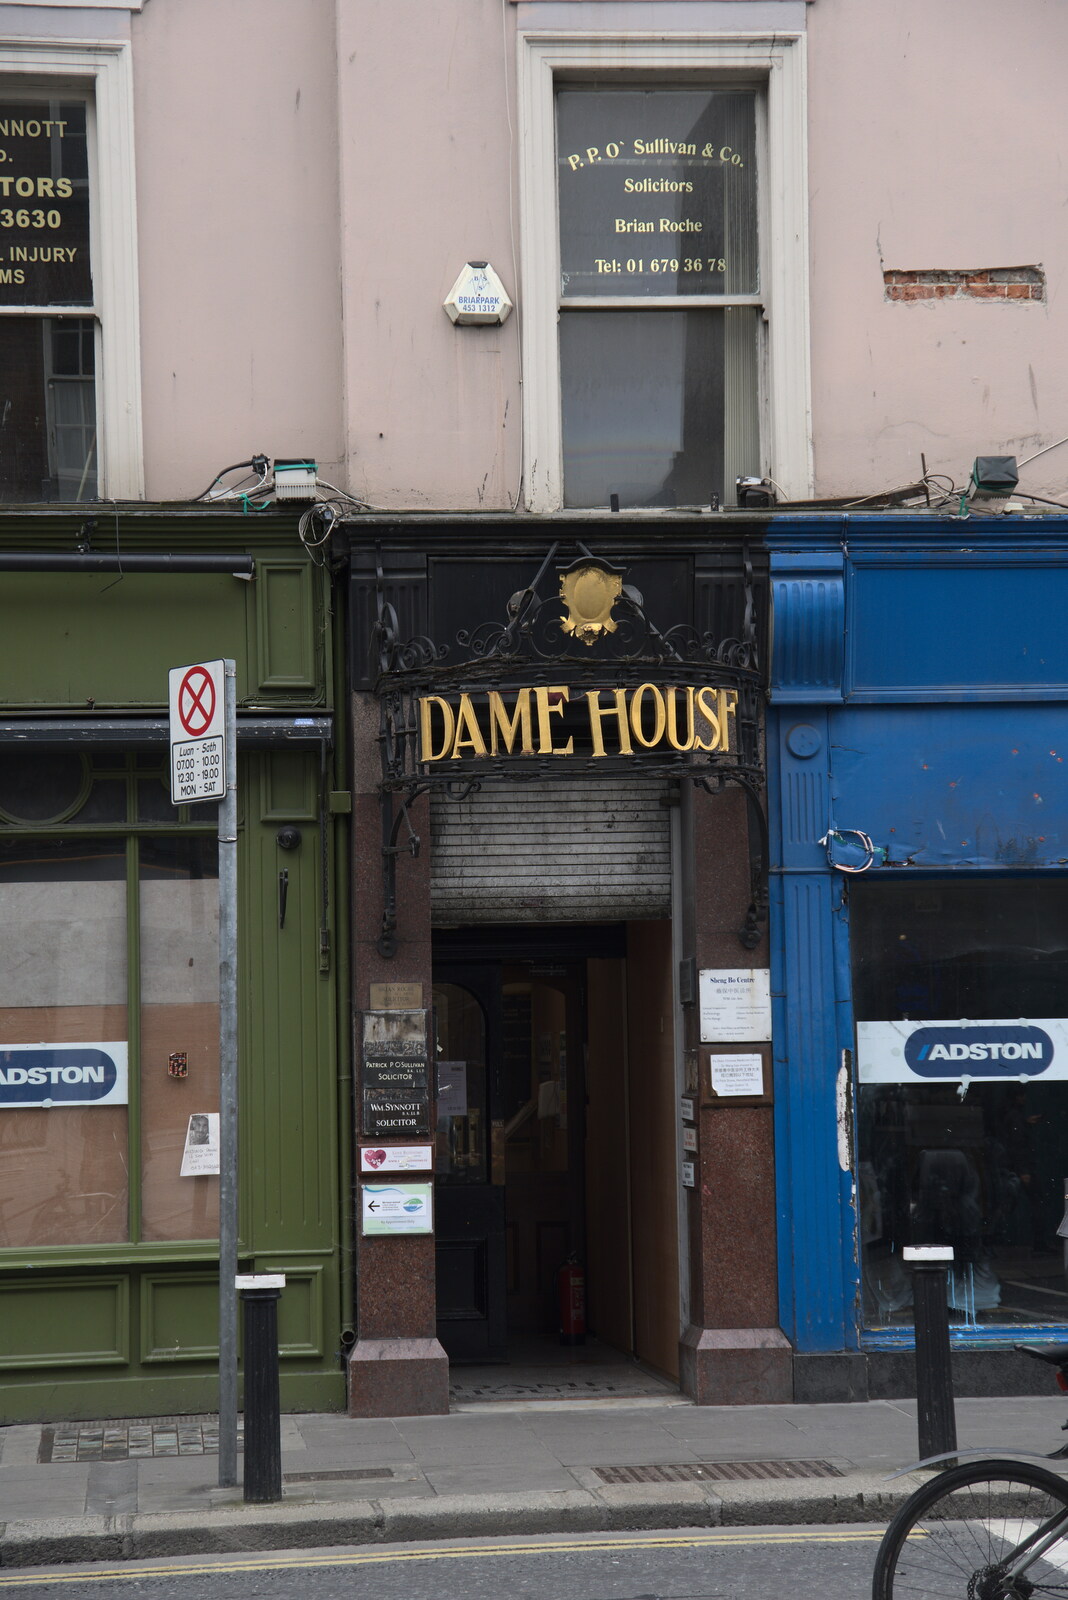 Dame House, on Dame Street from A Trip to Noddy's, and Dublin City Centre, Wicklow and Dublin, Ireland - 16th August 2021